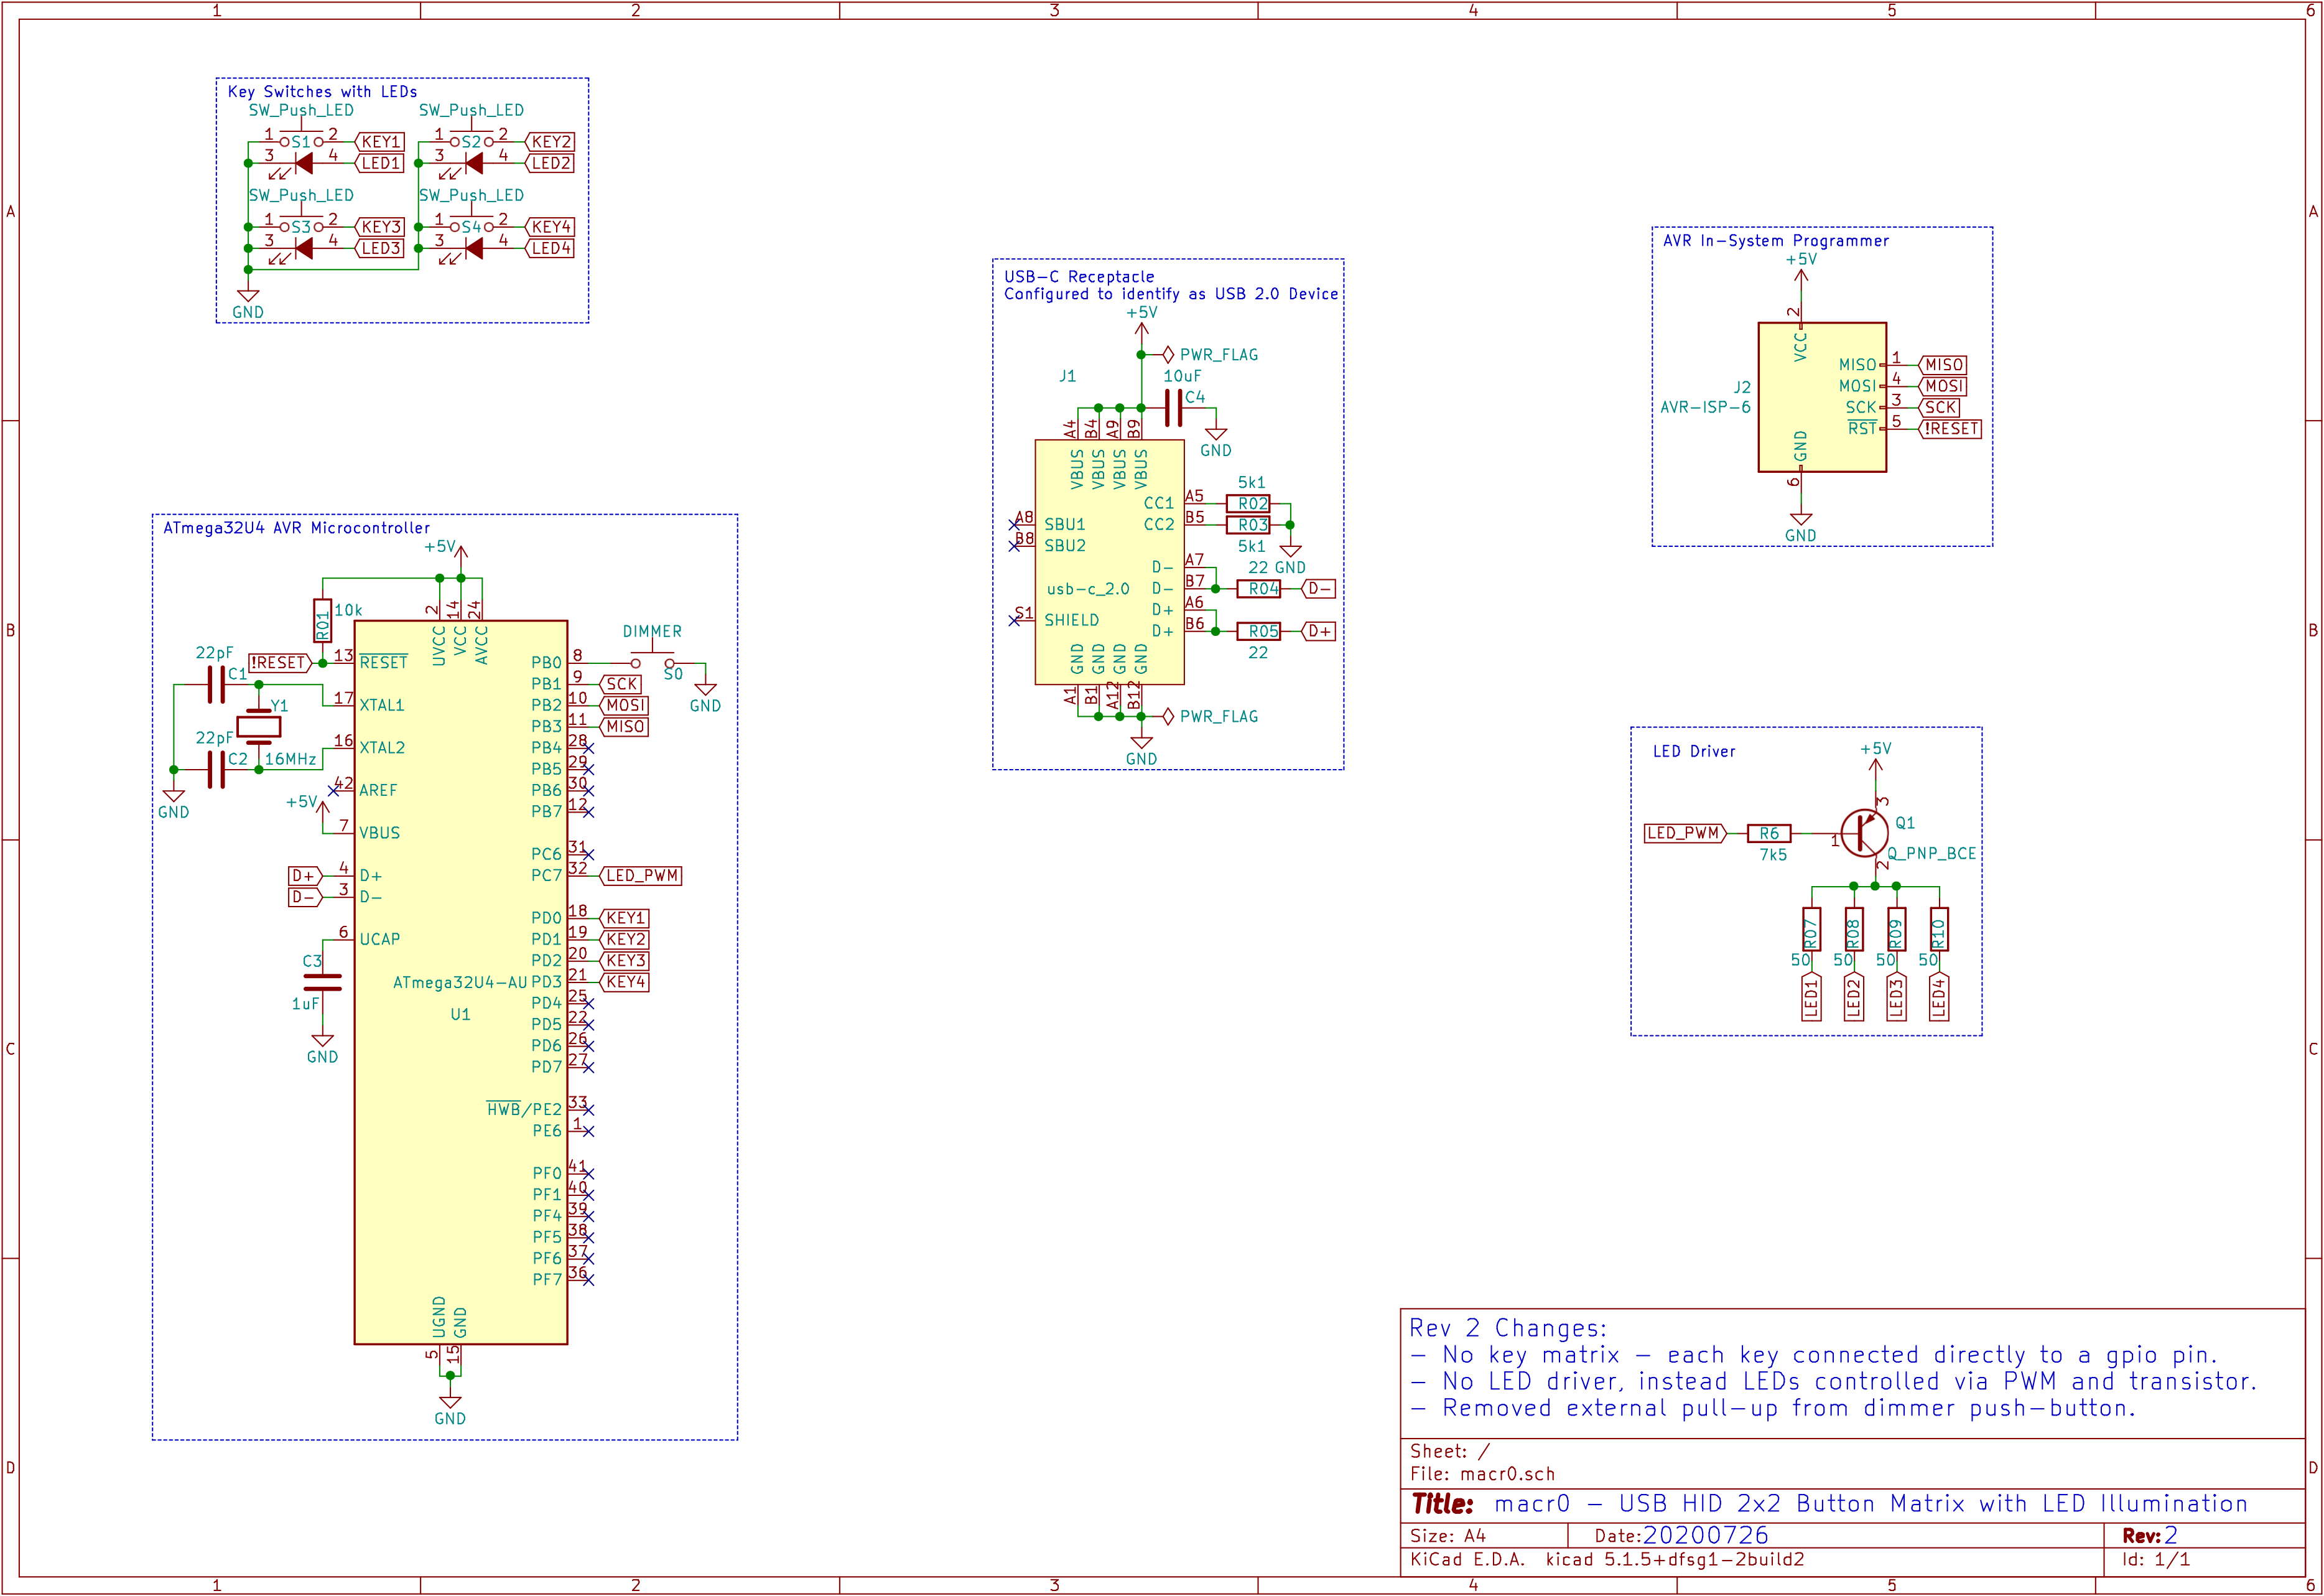 Schematic for revision 2.